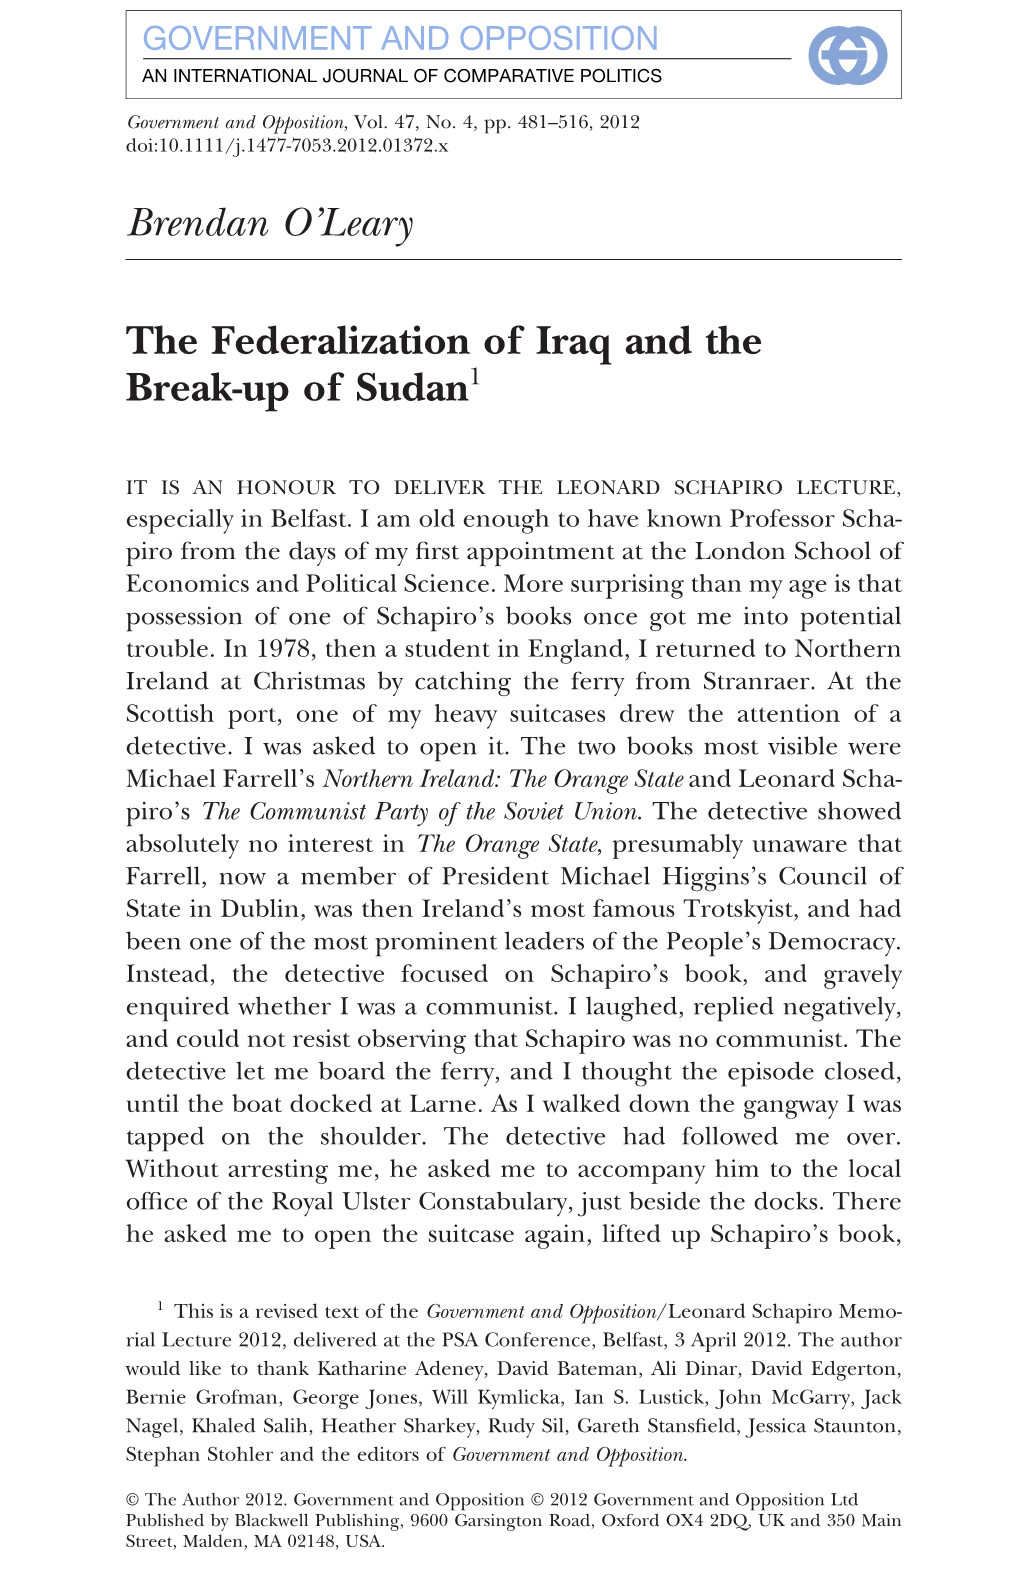 The Federalization of Iraq and the Breakup of Sudan